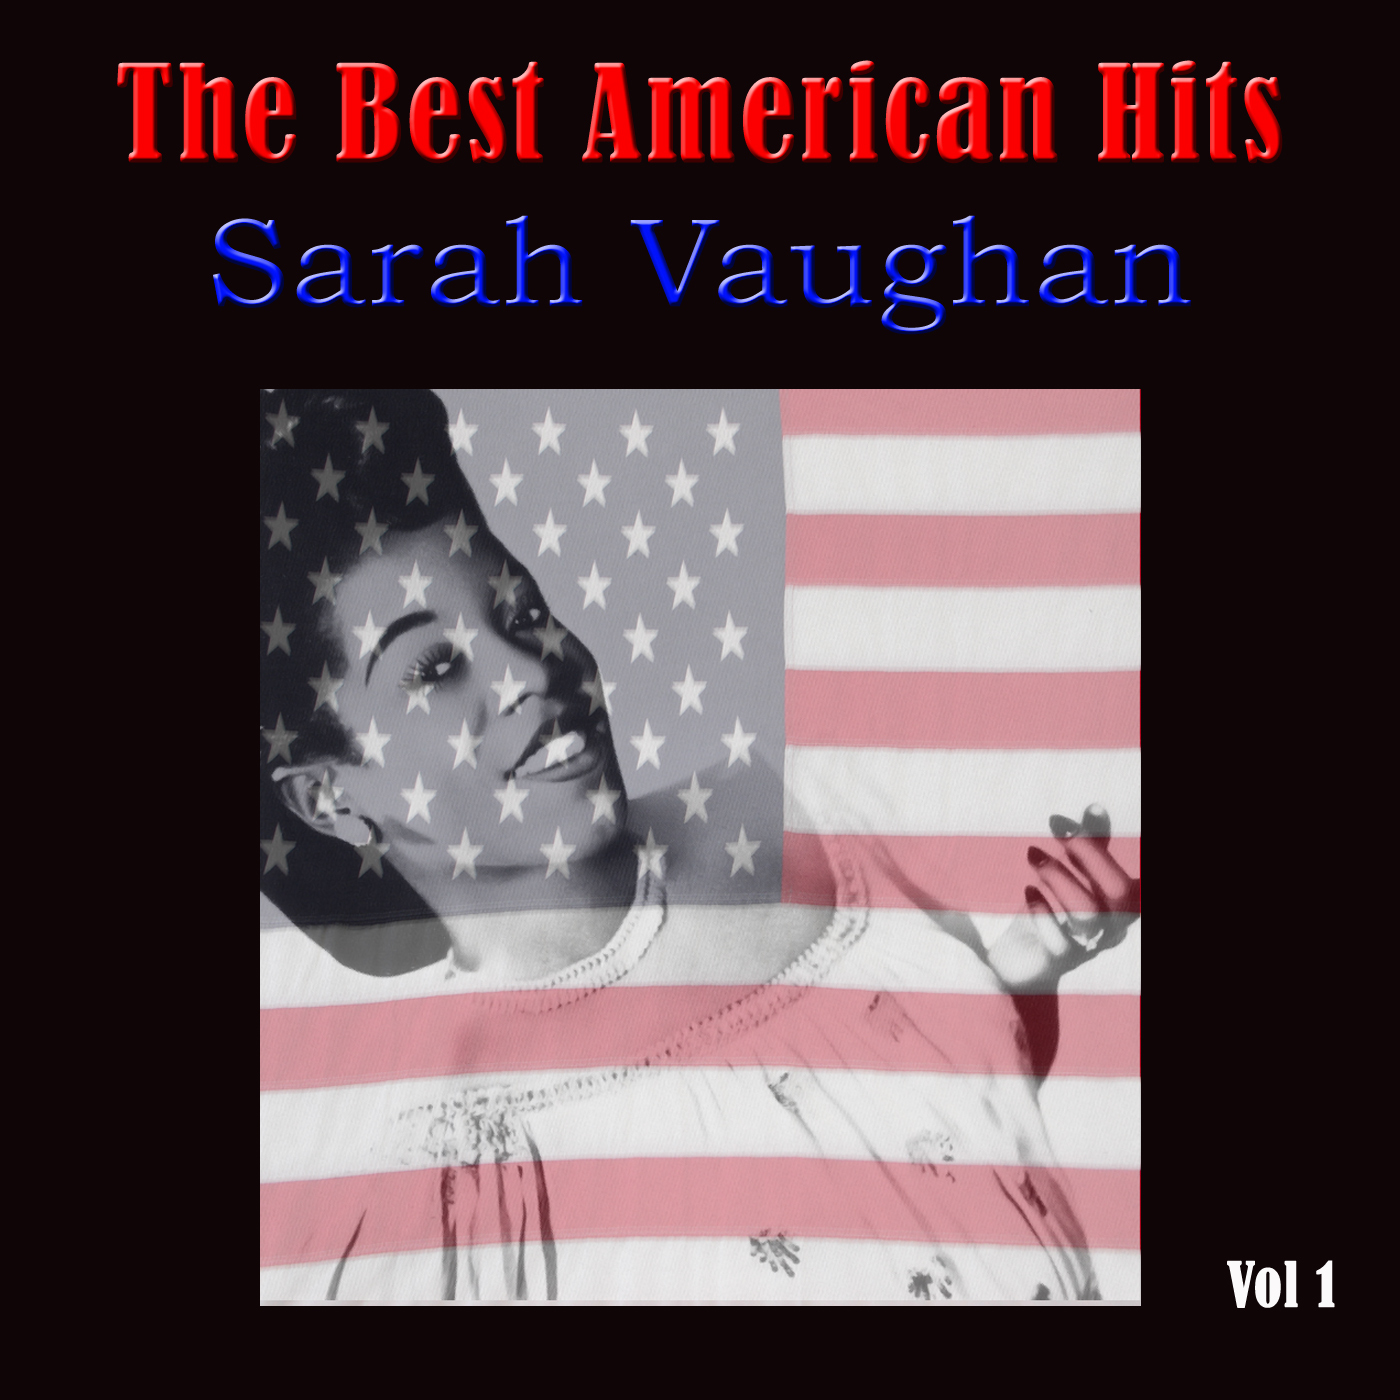 The Best American Hits, Vol. 1